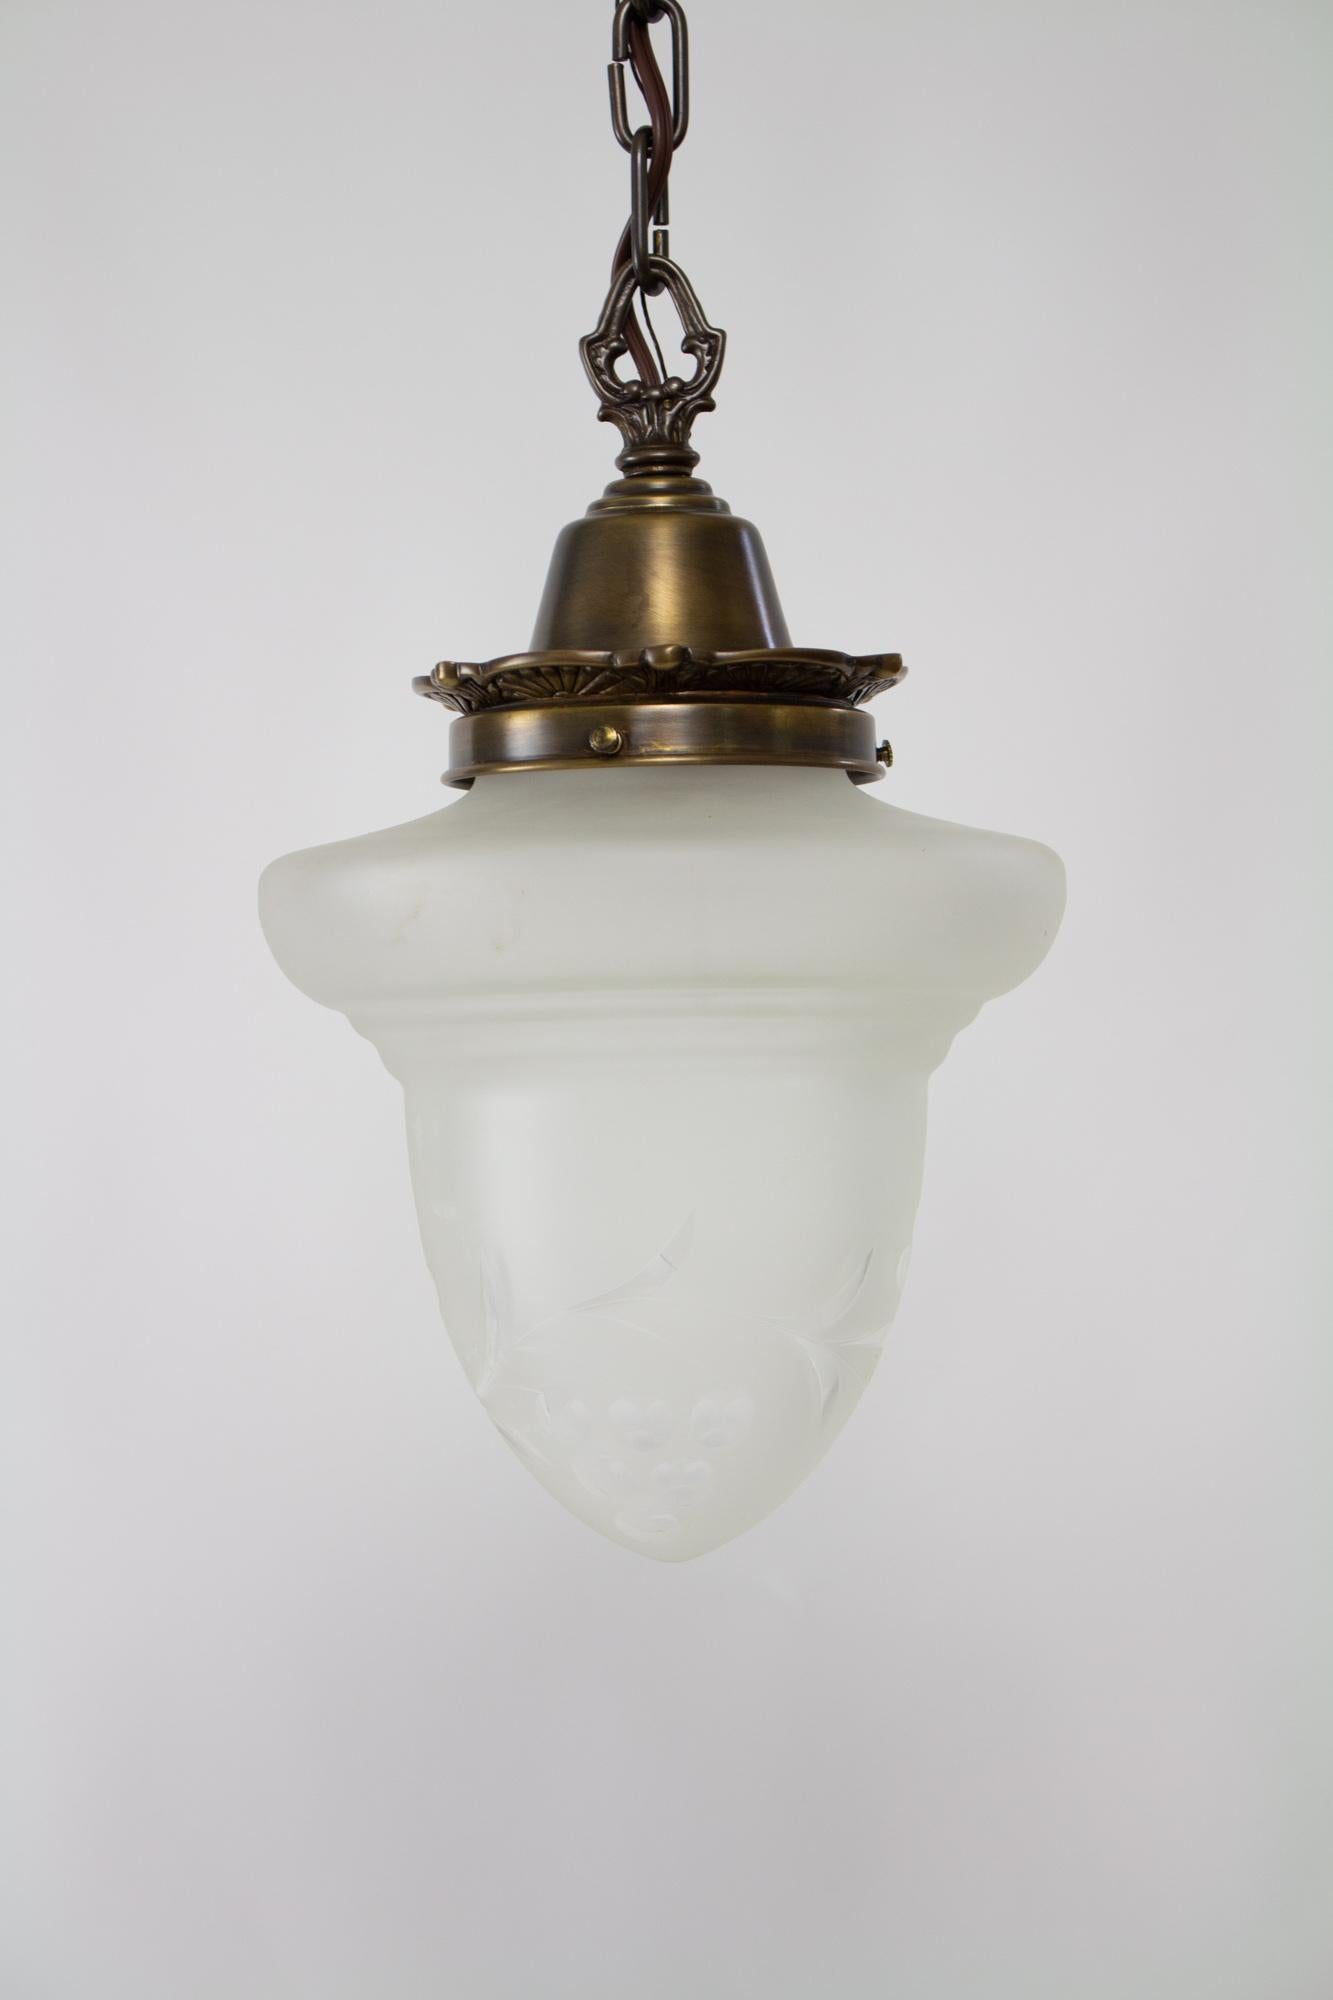 Early 20th Century acorn glass pendant. Custom new pendant in solid brass. Glass is frosted with a cut glass colonial revival grape pattern. Glass in very good condition, with light marking due to the age. Single Edison base socket, 100 Watt max.